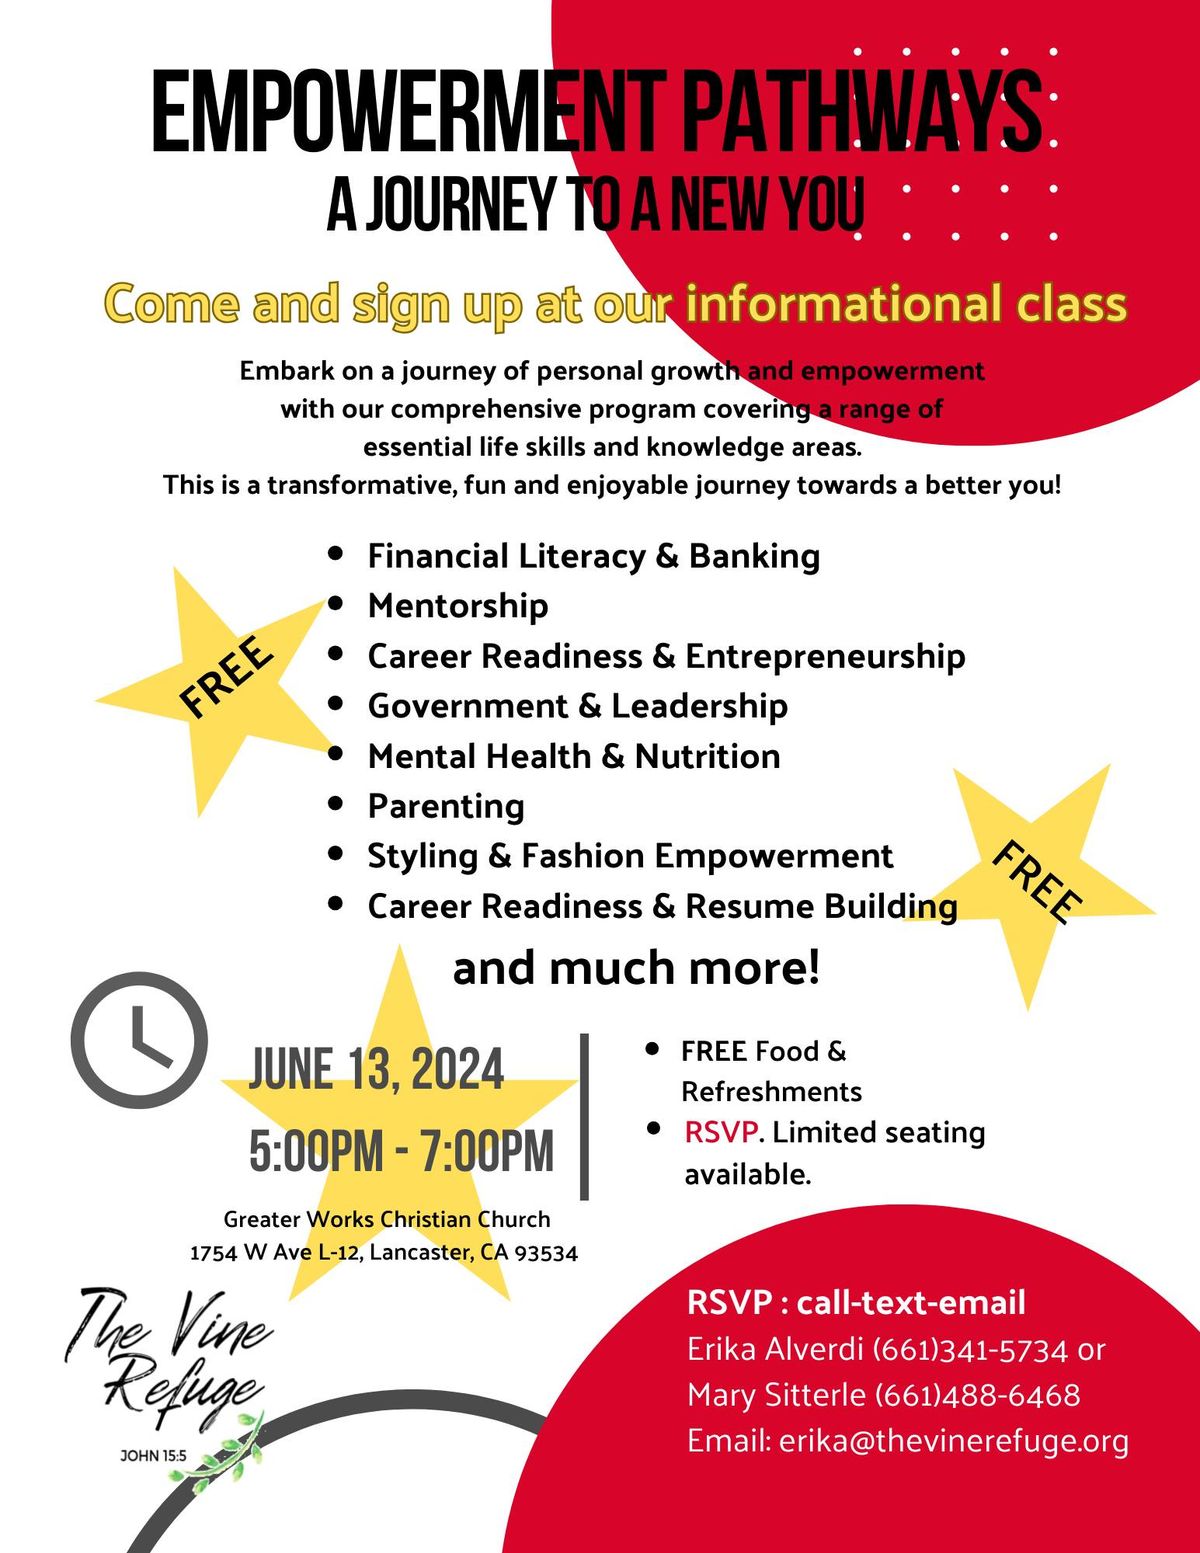 EMPOWERMENT PATHWAYS: A JOURNEY TO A NEW YOU!